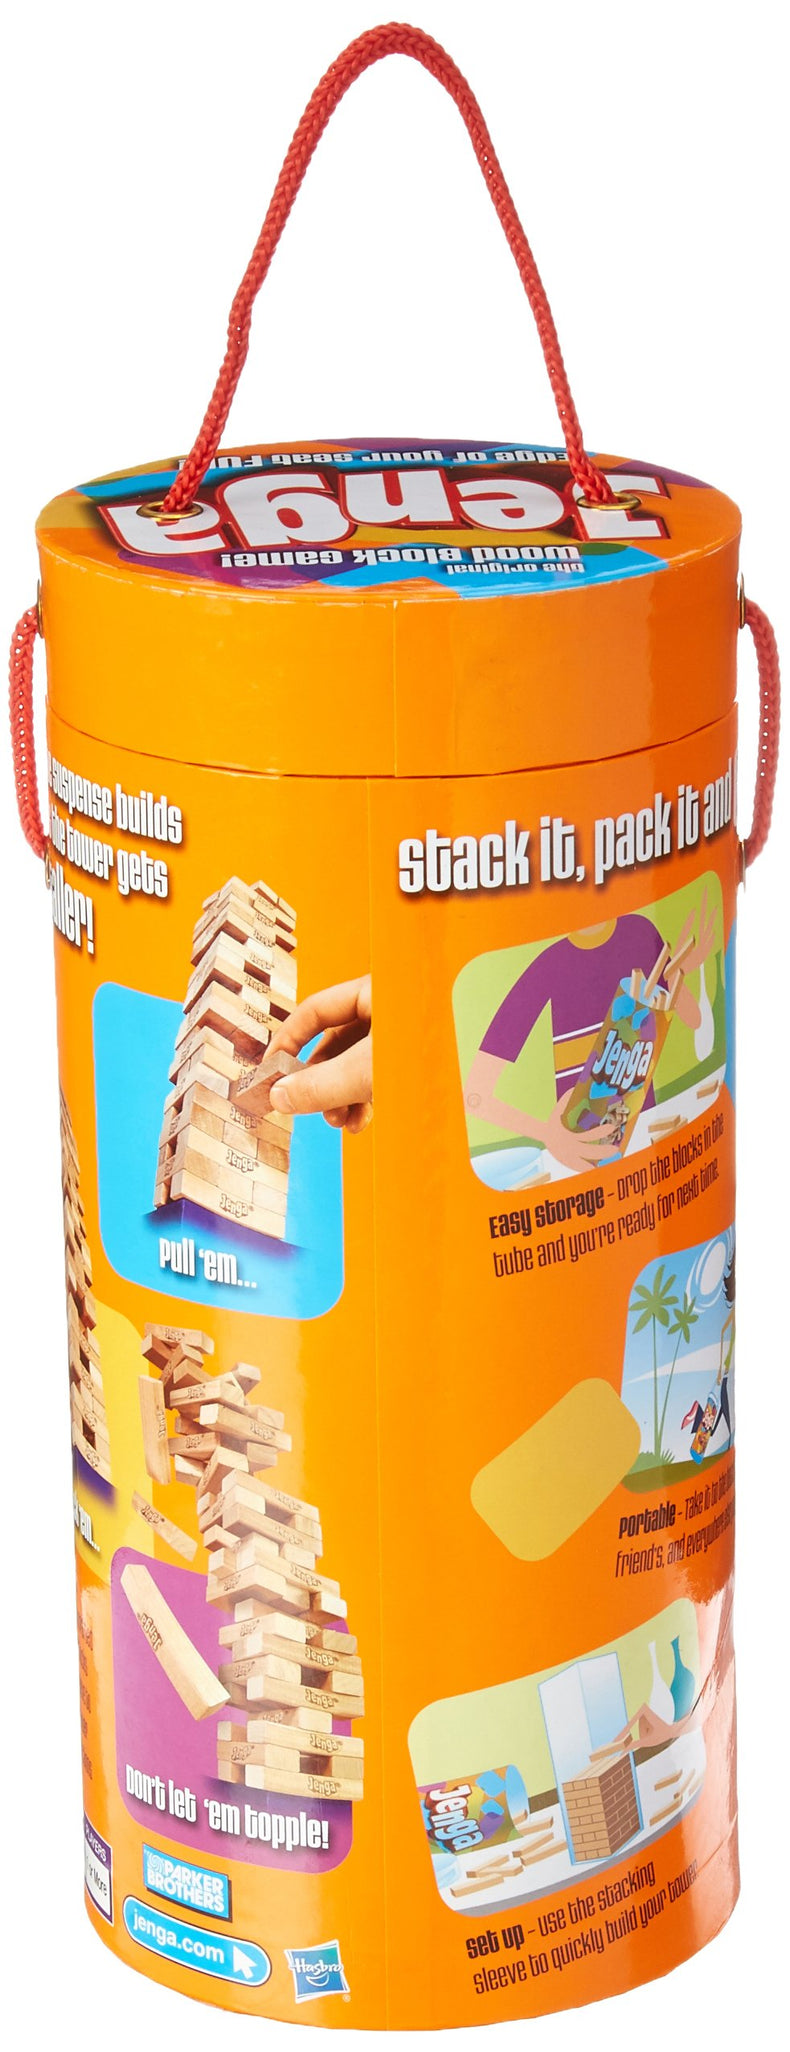 Jenga Game Wooden Blocks Stacking Tumbling Tower Kids Game Ages 6 and Up (Amazon Exclusive)